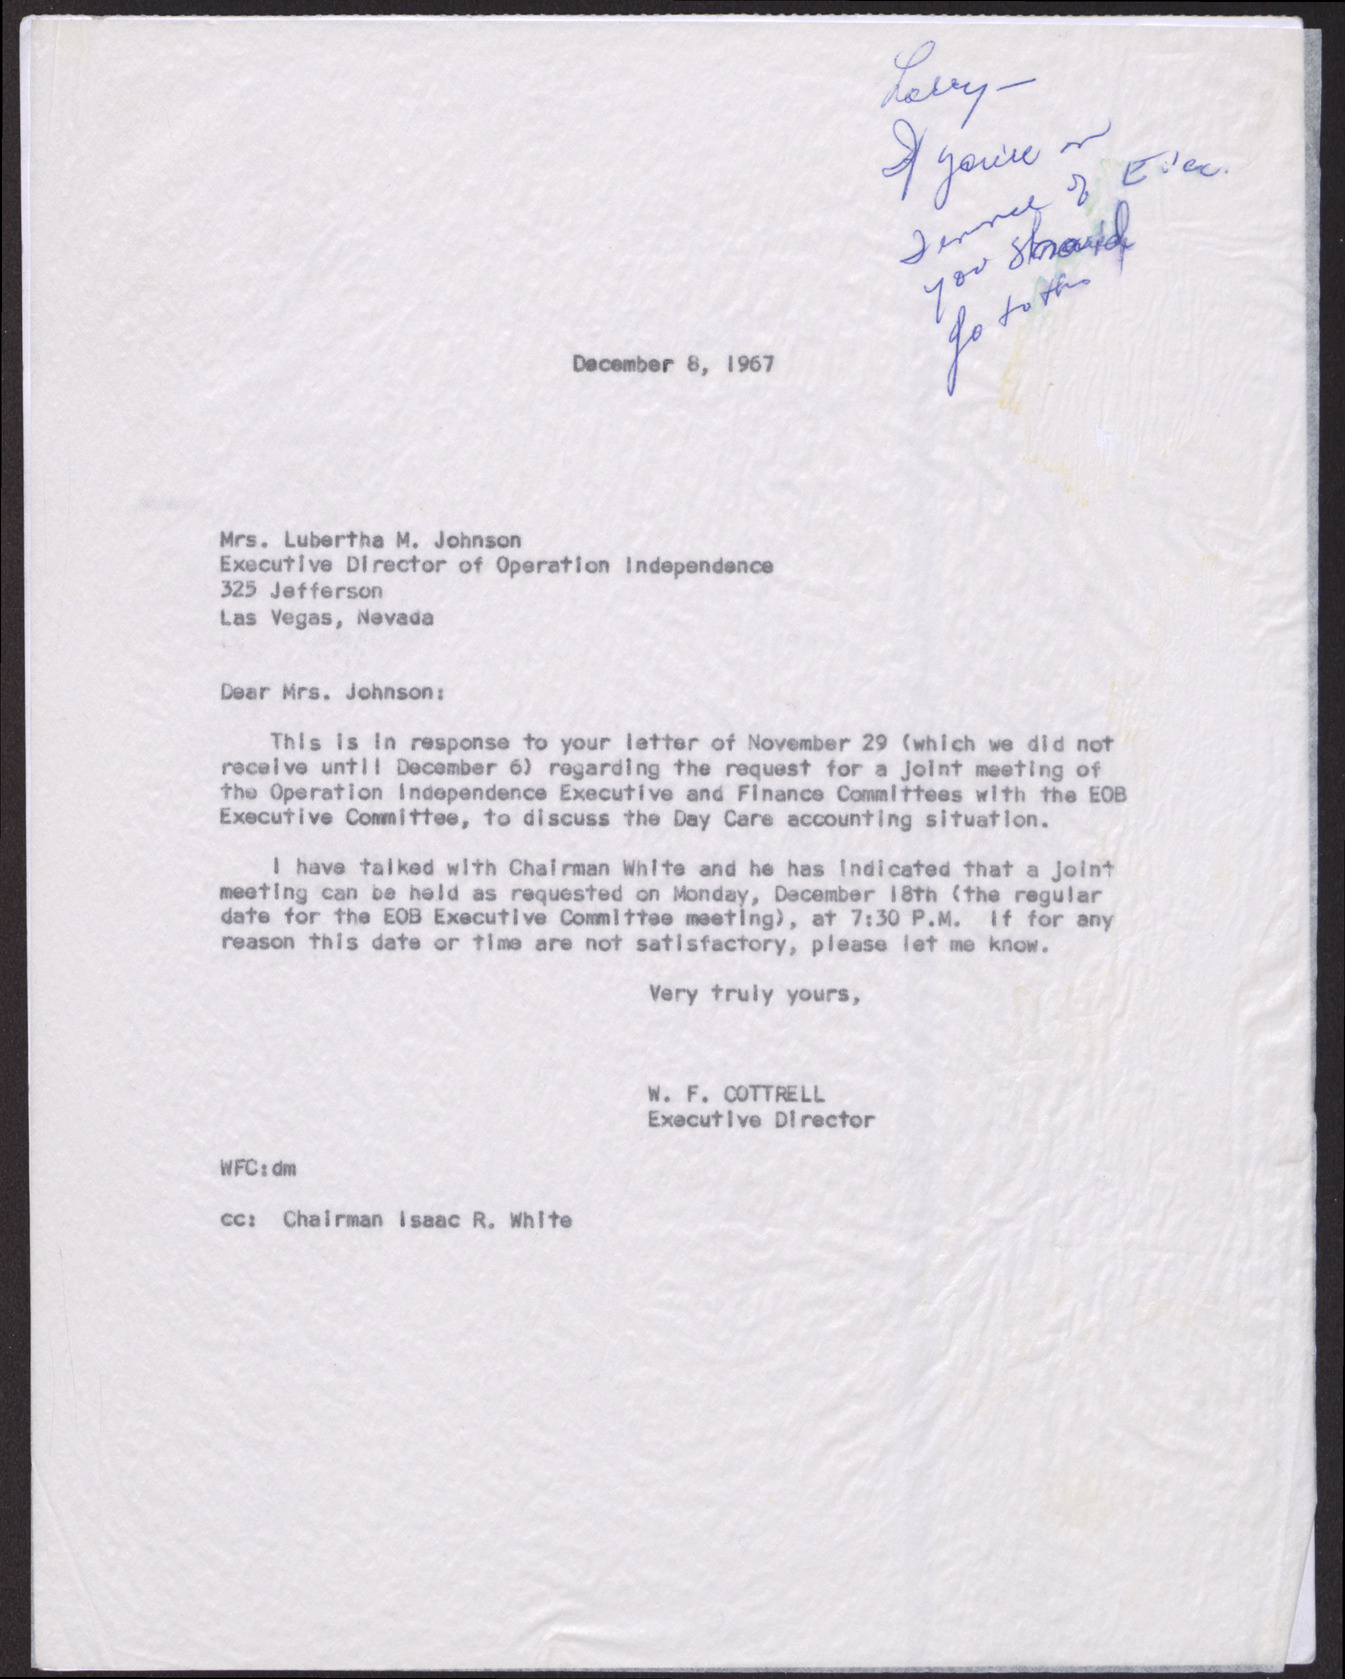 Letter to Mrs. Lubertha M. Johnson from W. F. Cottrell, December 8, 1967